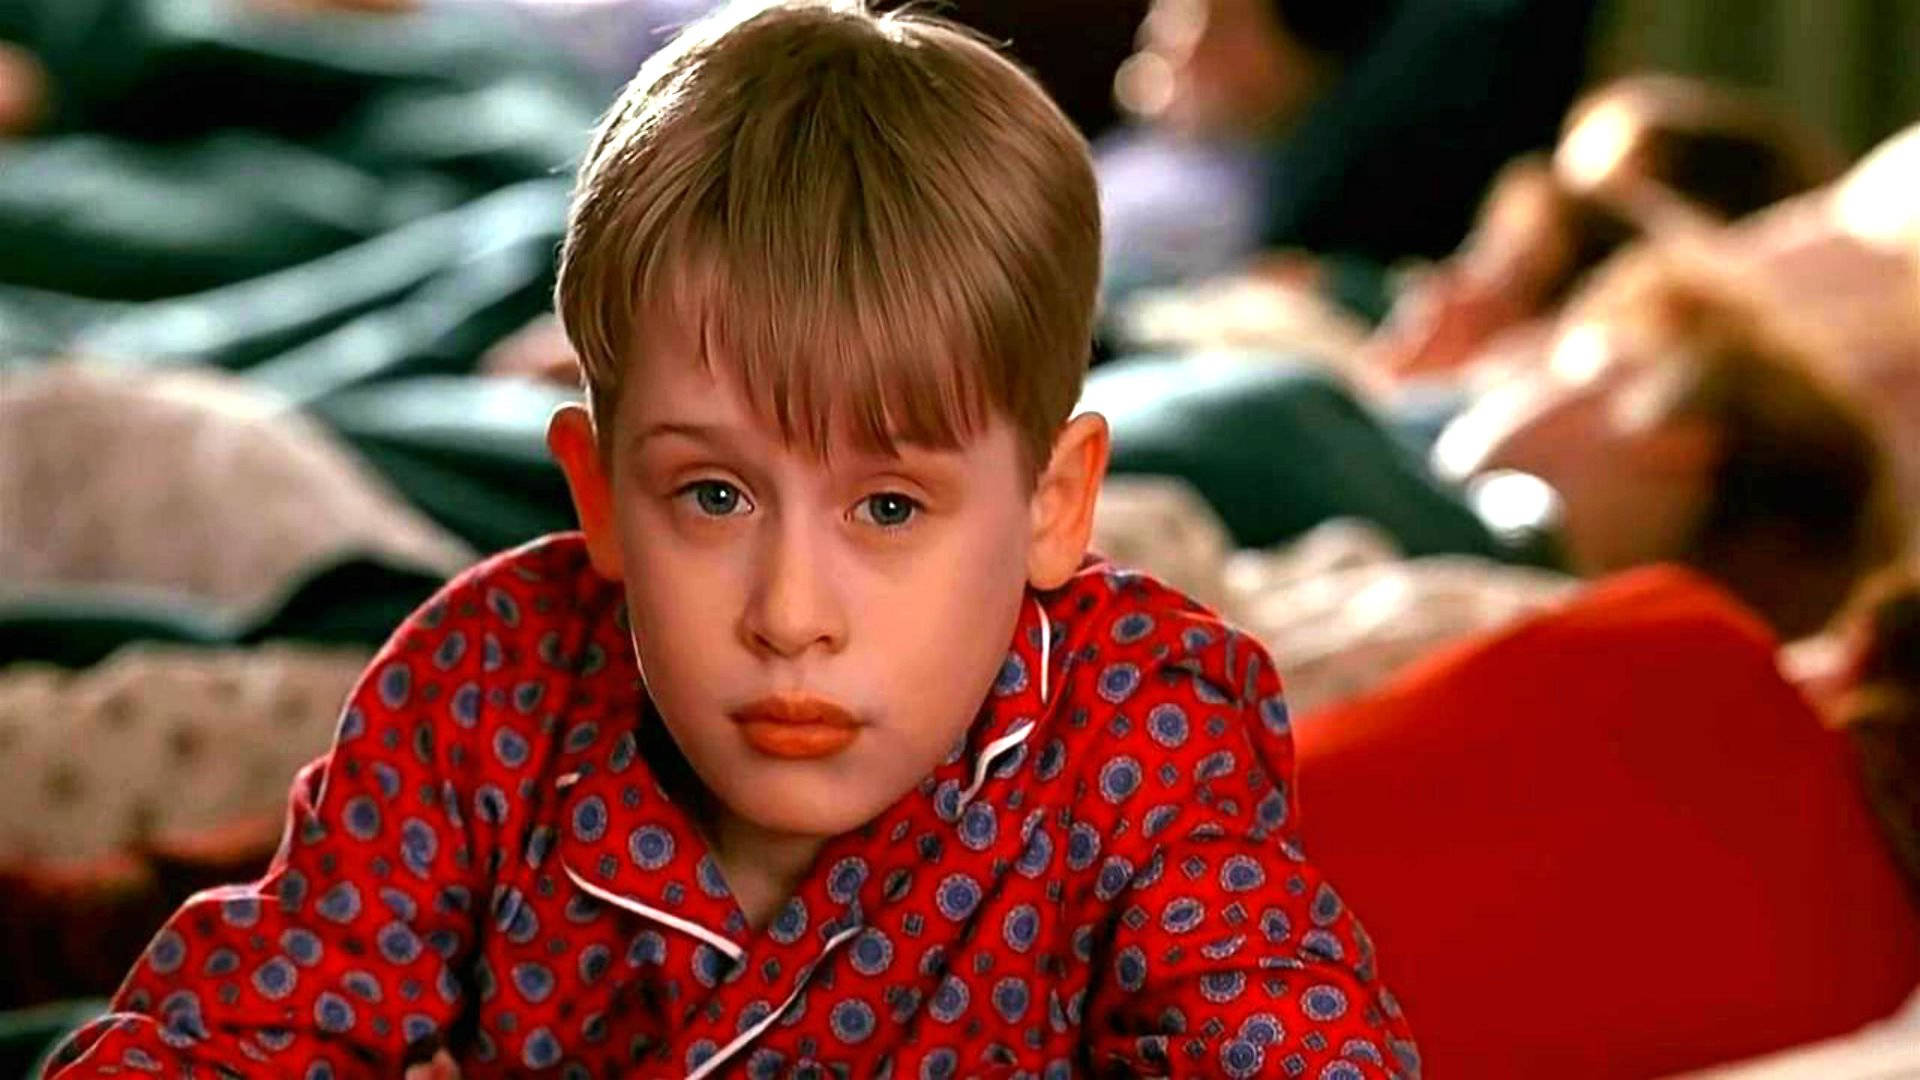 Home Alone Kevin In Pajamas Background